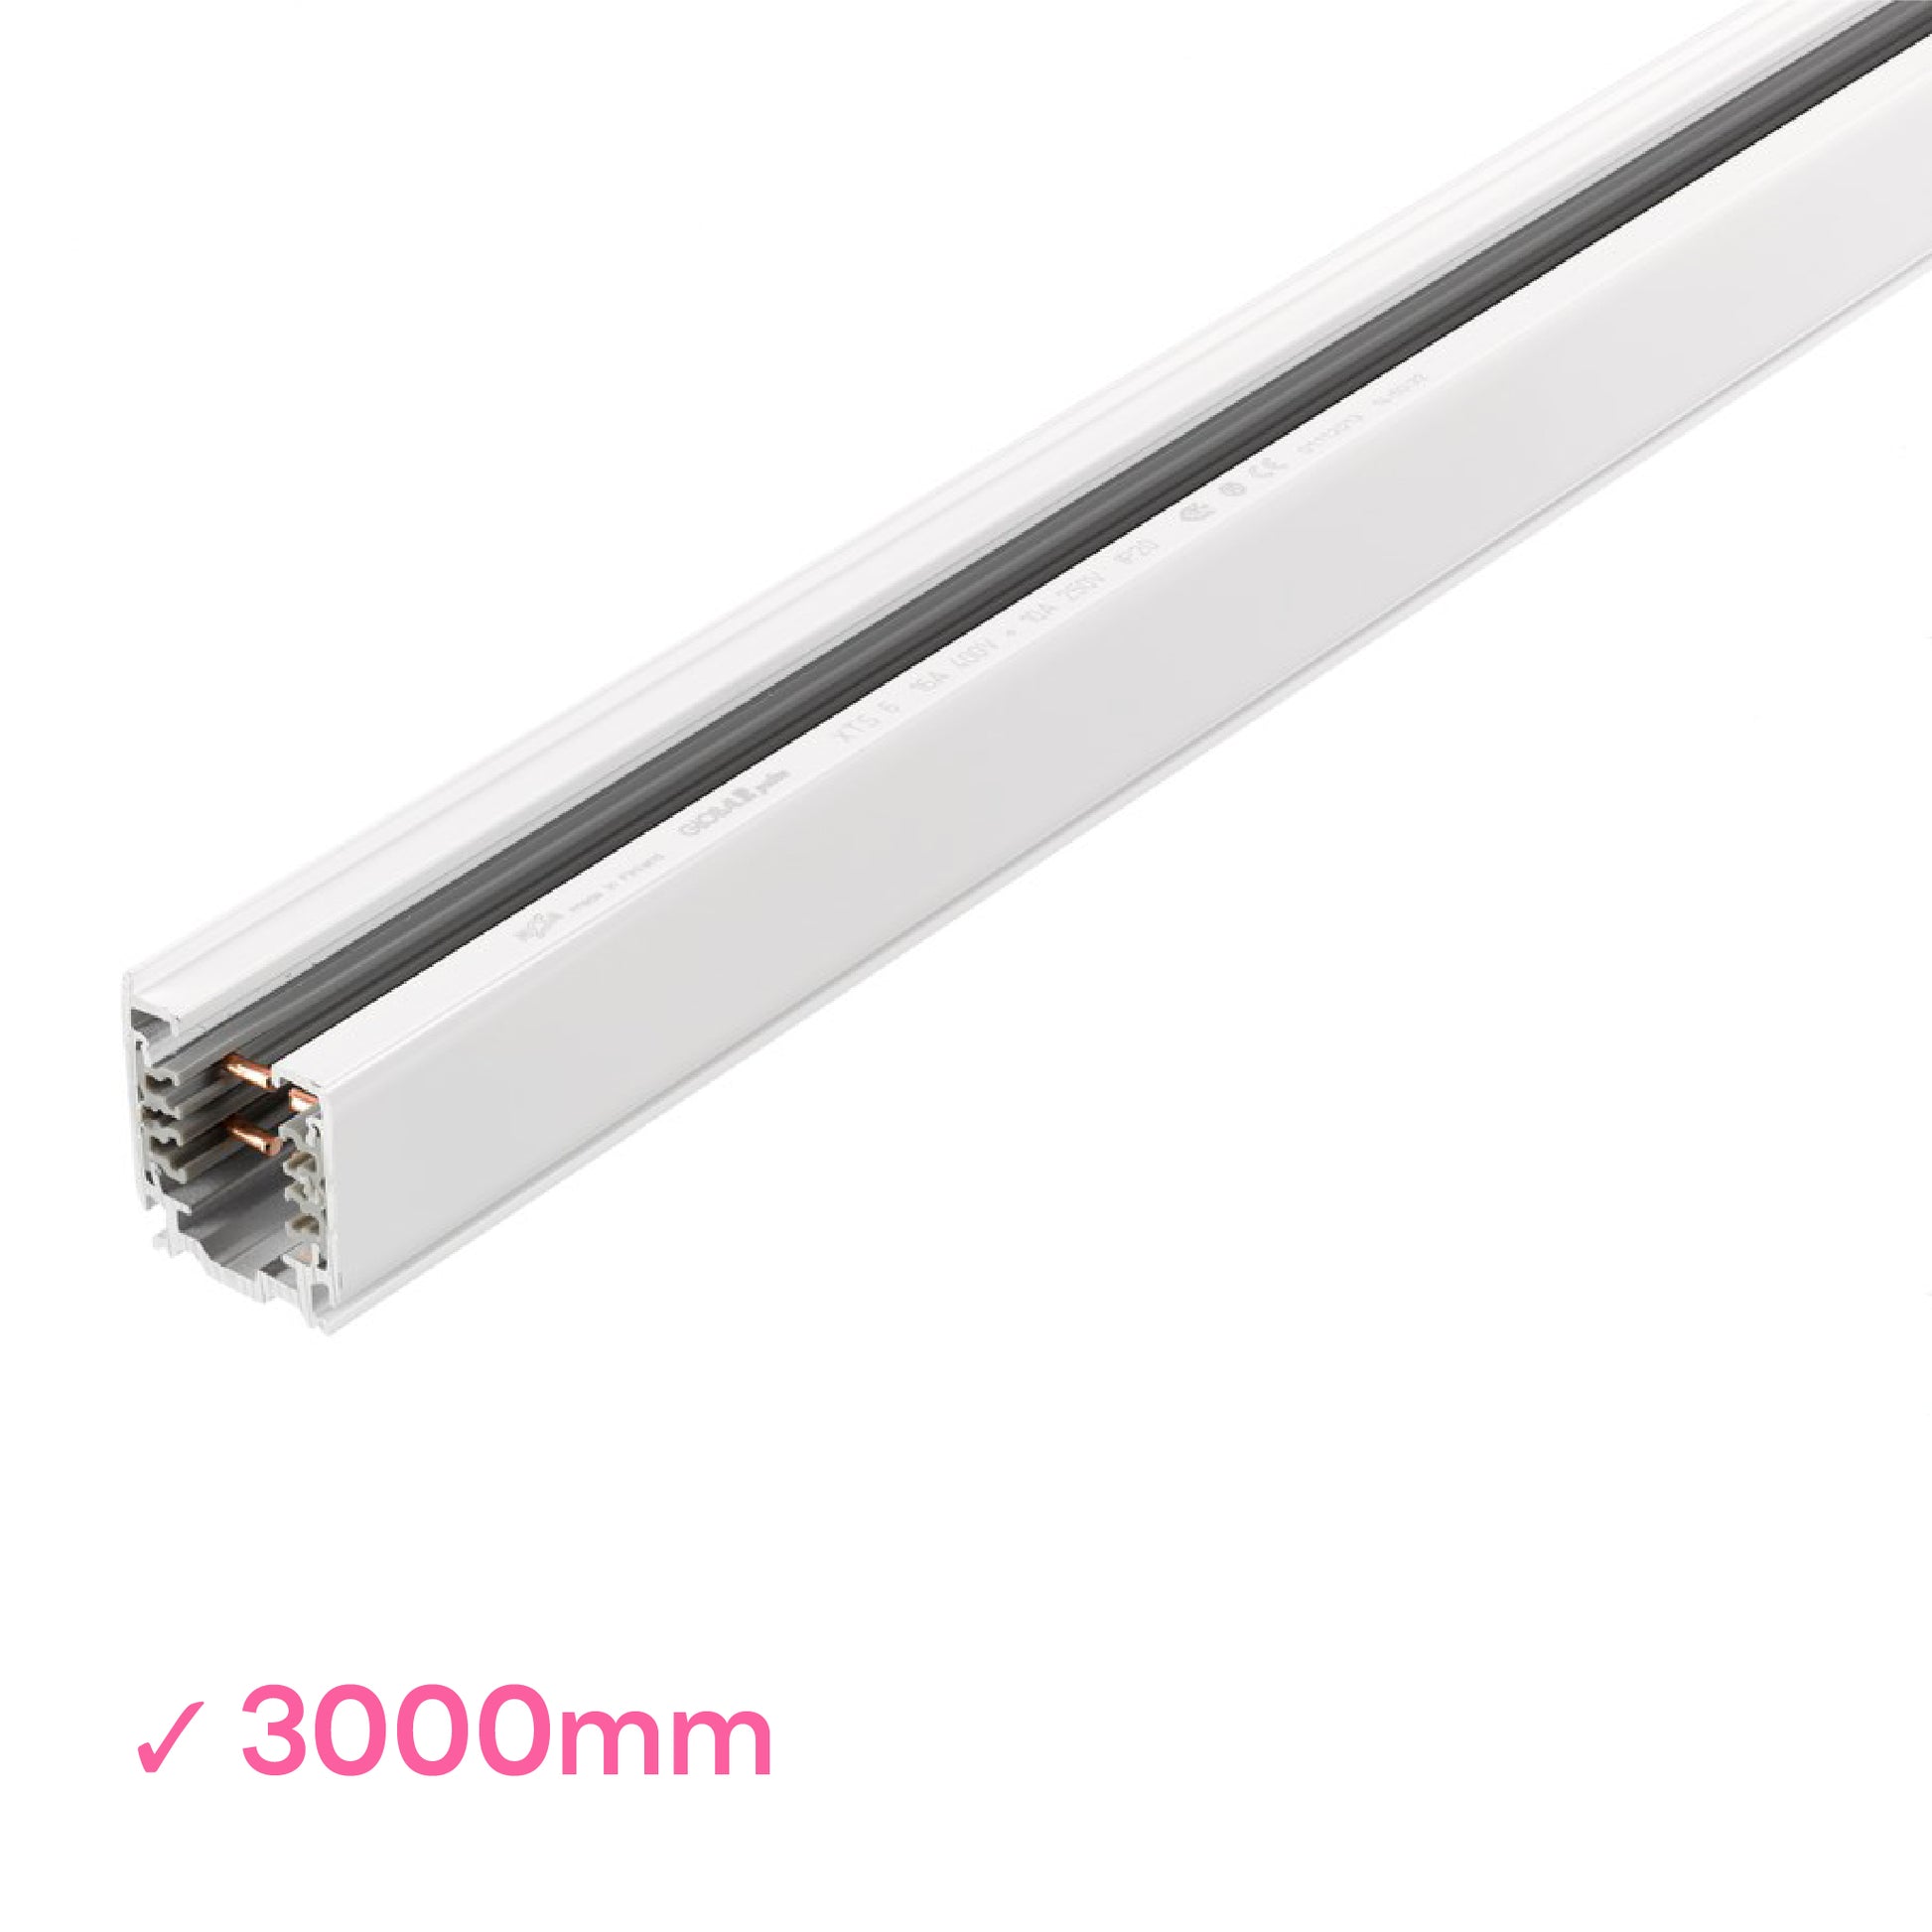 Global 3000mm or 3m white powder coated DALI 3 Circuit Track 3 metre surface mounted track by Nordic Aluminium <XTSC6300-3>